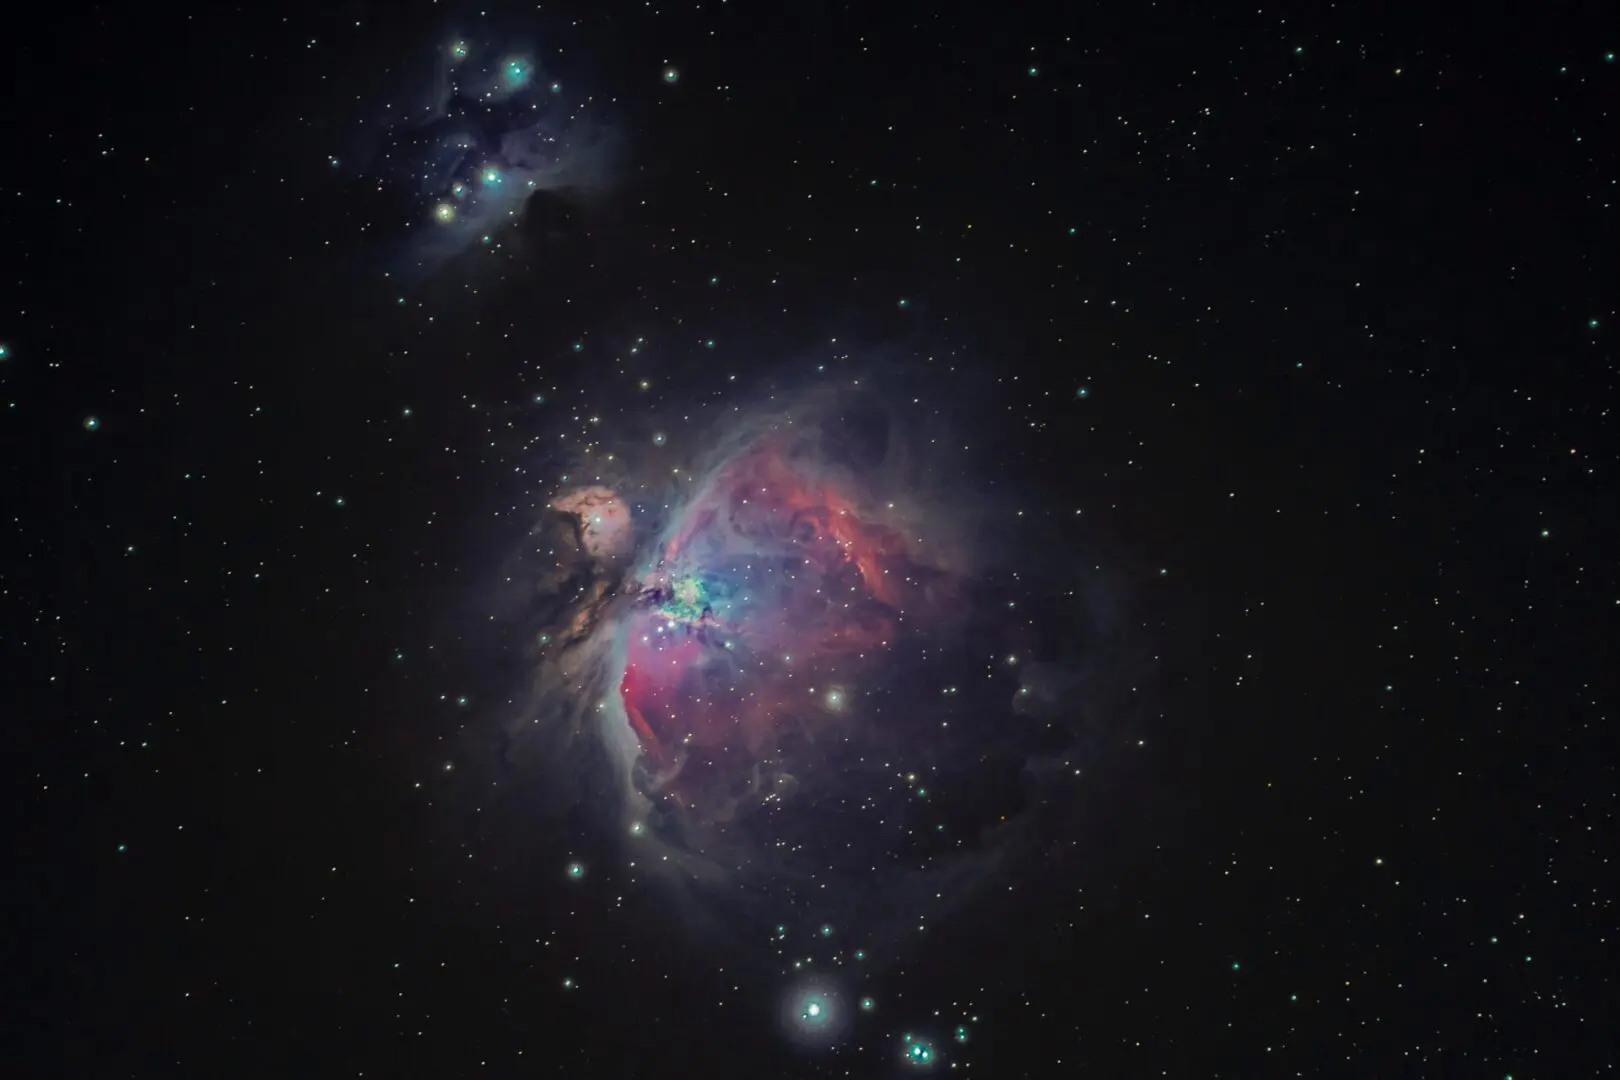 A picture of the orion nebula taken by a telescope.